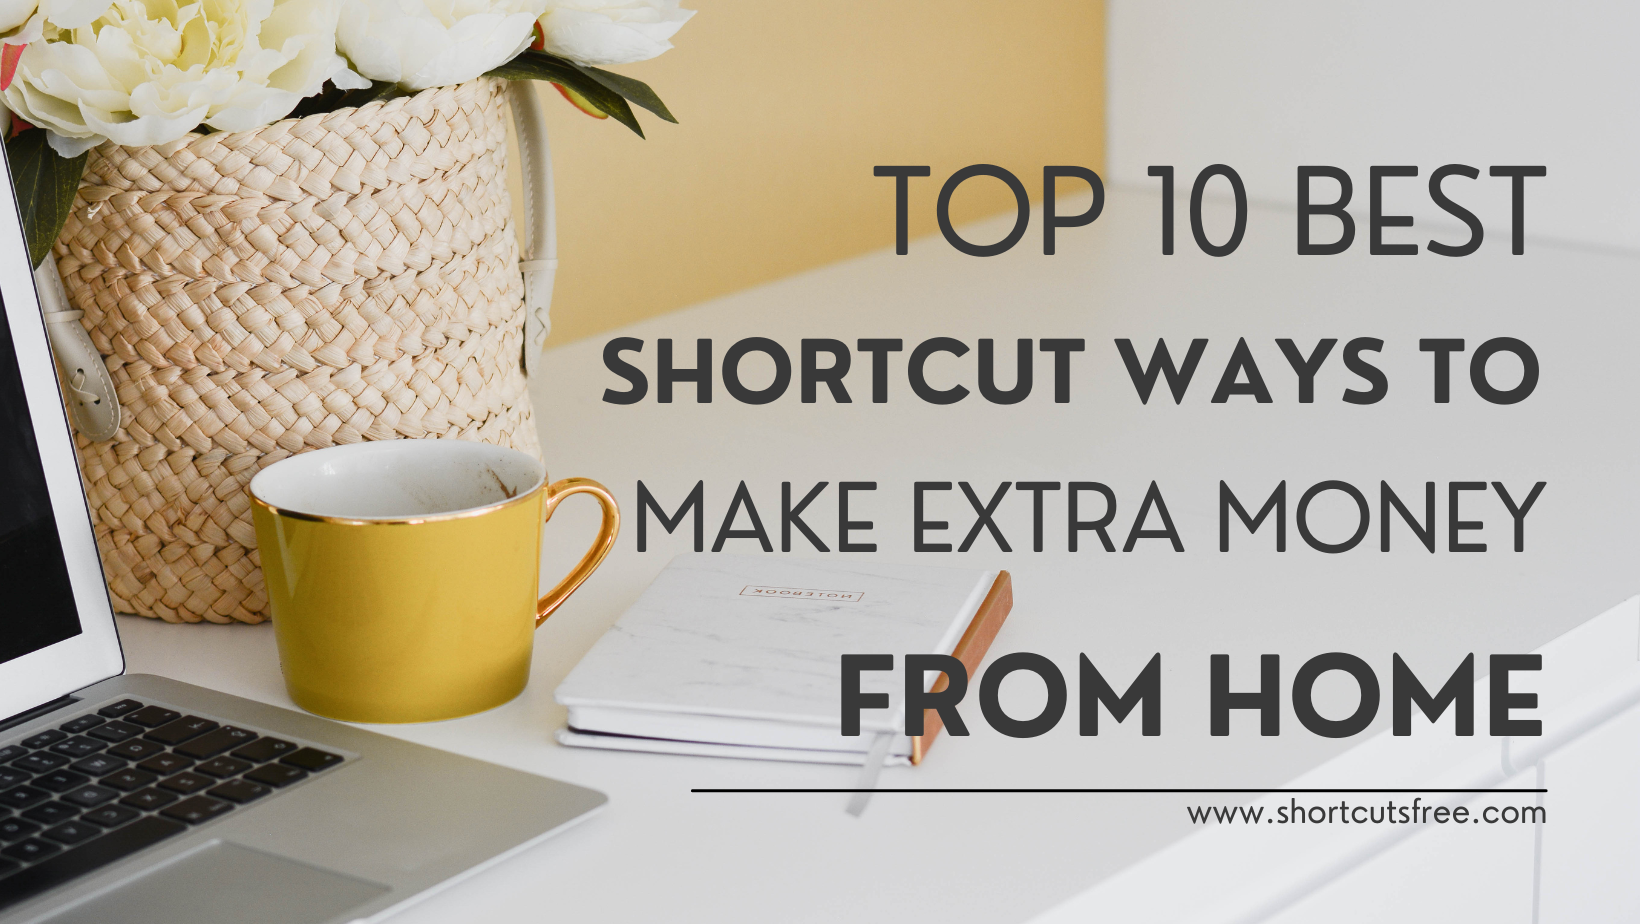 Top 10 Best Shortcut Ways to Make Extra Money From Home